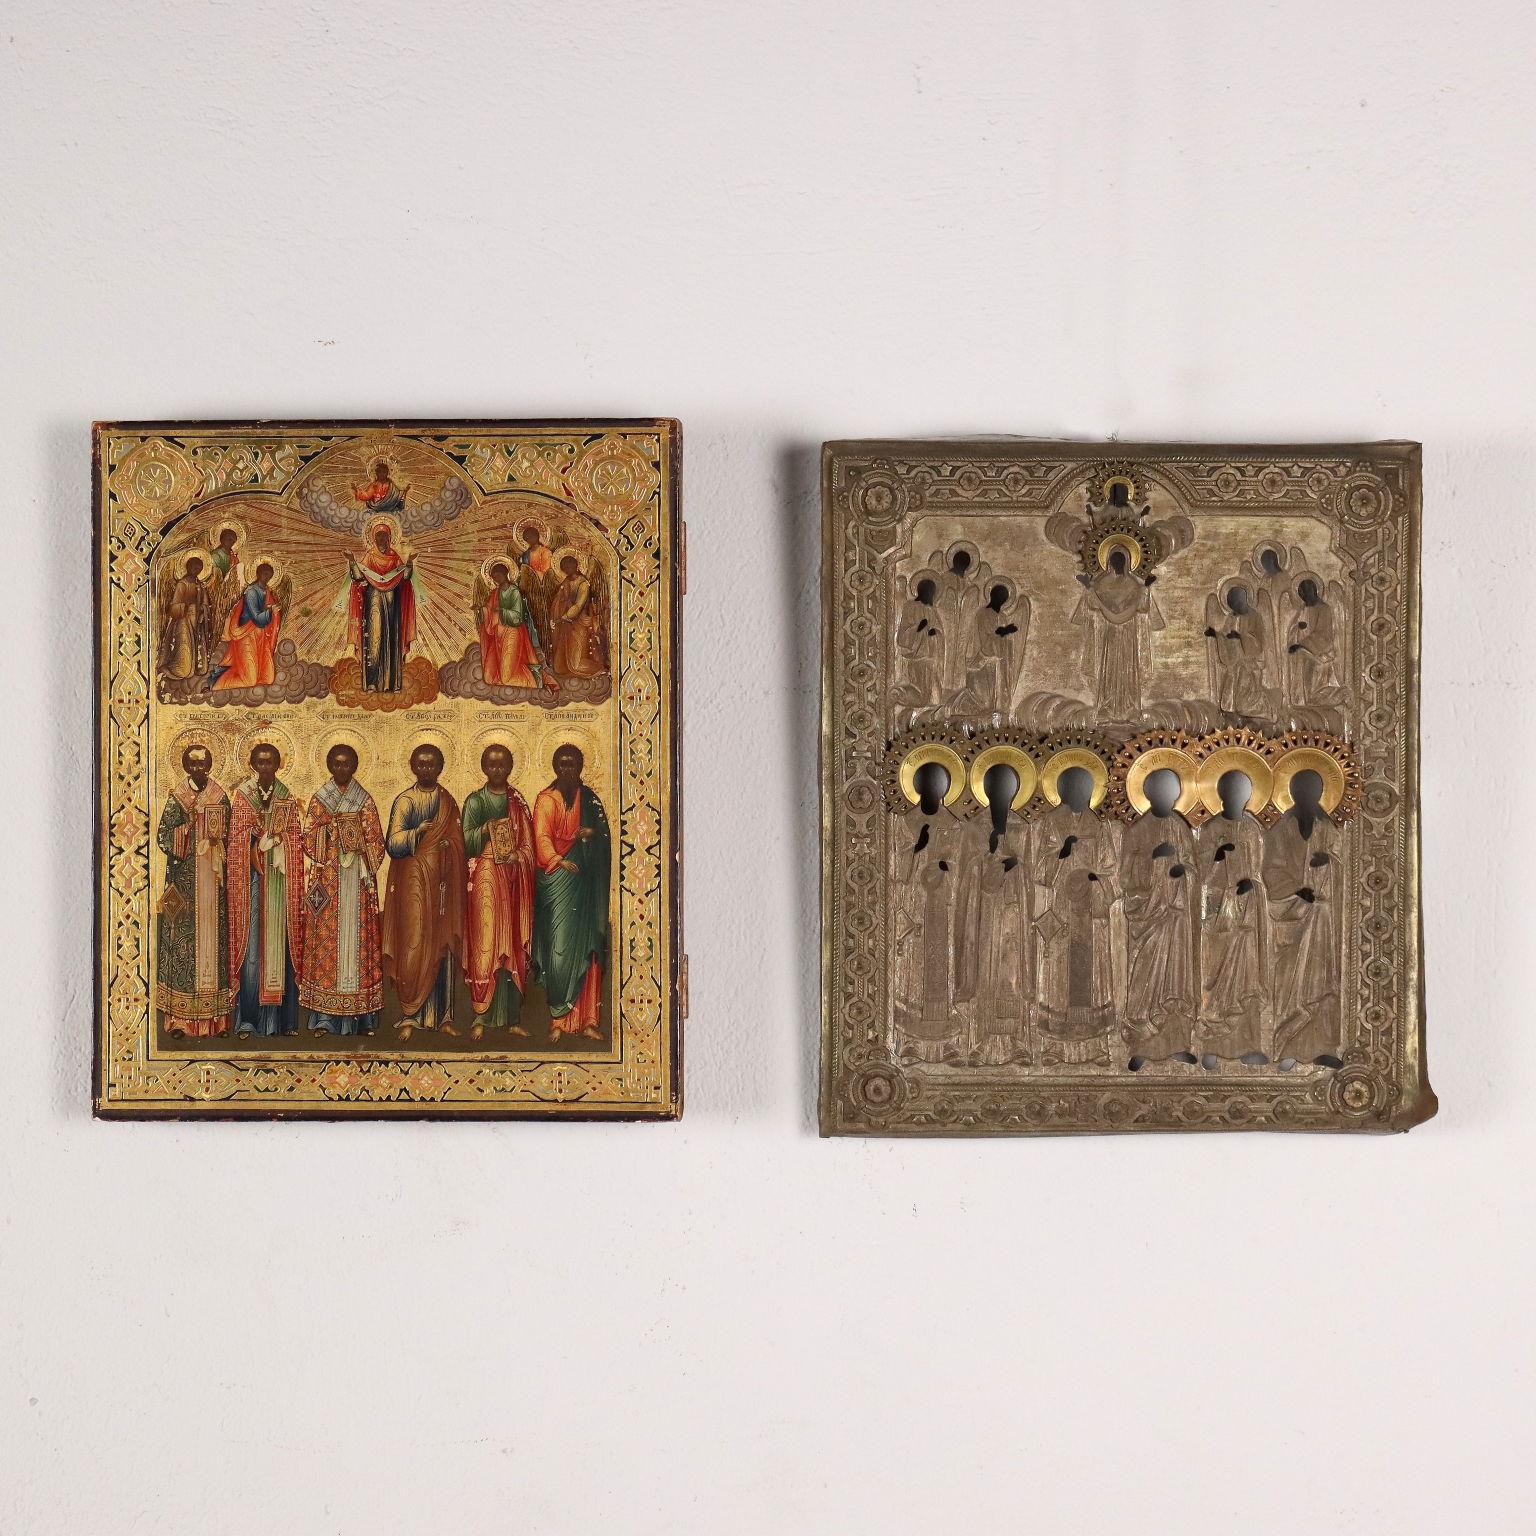 Tempera on wood with metal riza, gilded in correspondence with the halos. The icon sees in the lower half a group of six saints, whose name is indicated in Greek characters, while in the upper part there are Mary and Jesus in Glory, flanked by